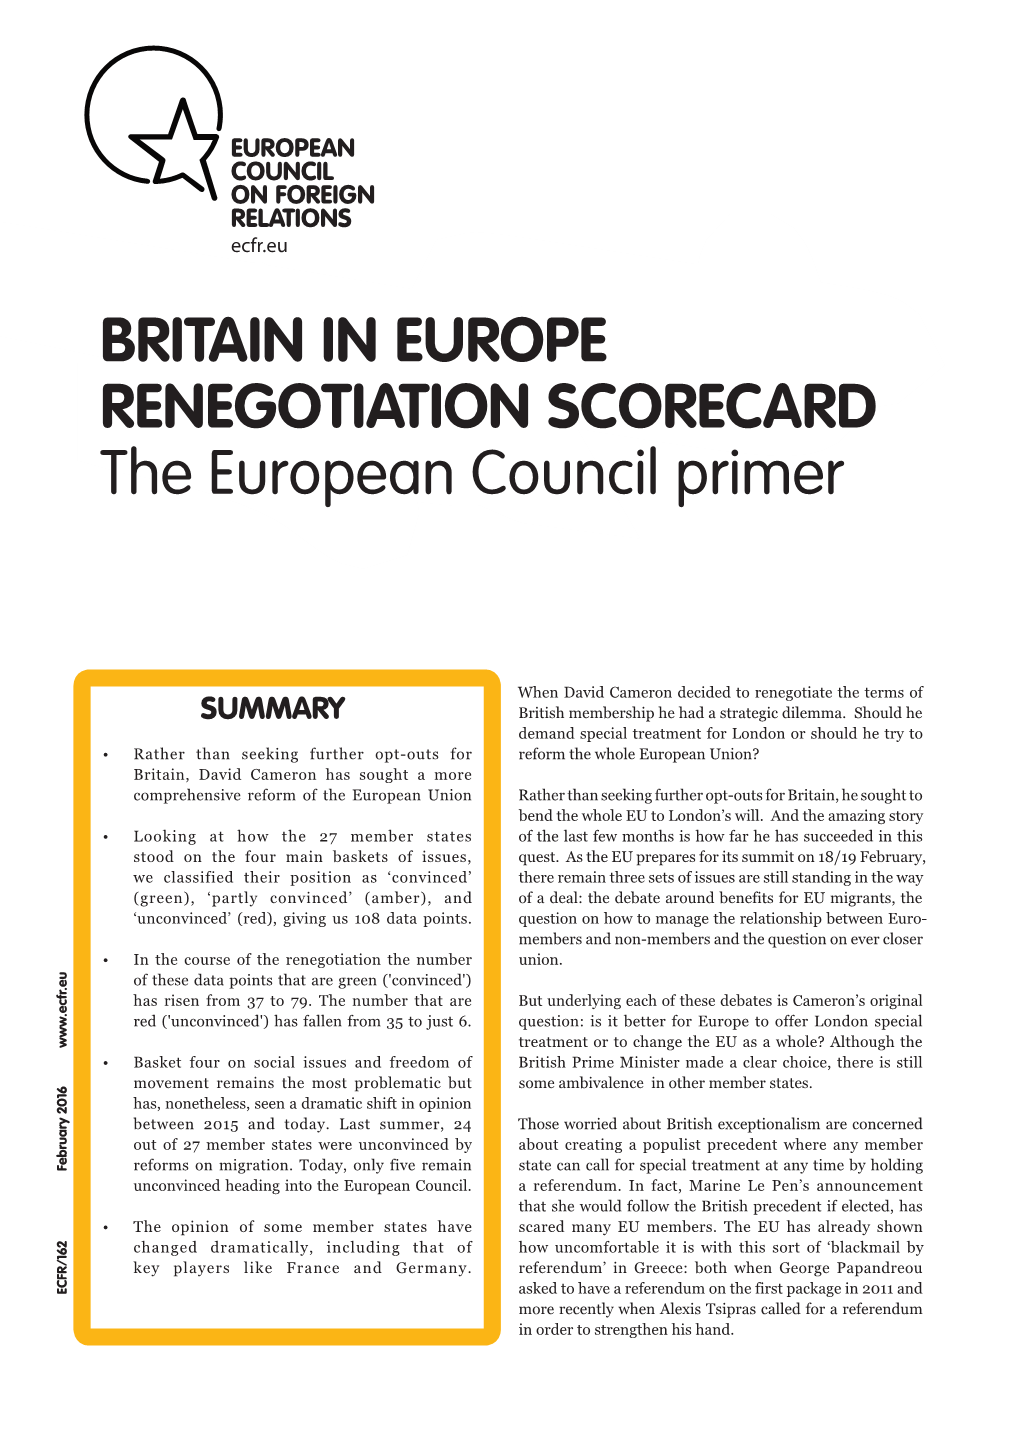 Britain in Europe Renegotiation Scorecard Is a (France)